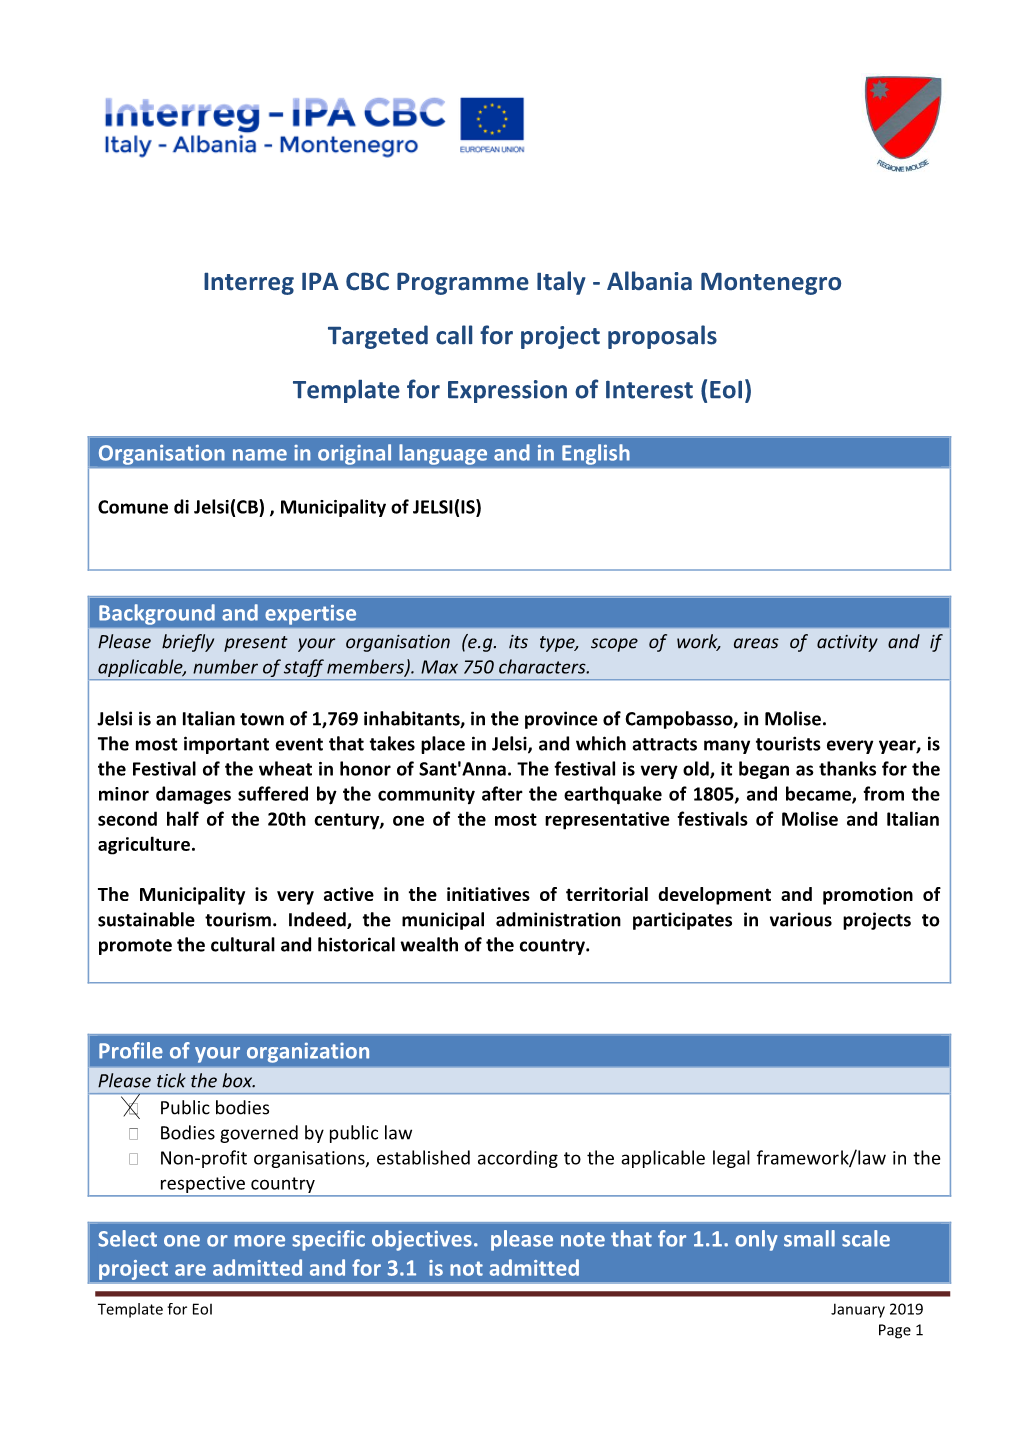 Interreg IPA CBC Programme Italy - Albania Montenegro Targeted Call for Project Proposals Template for Expression of Interest (Eoi)